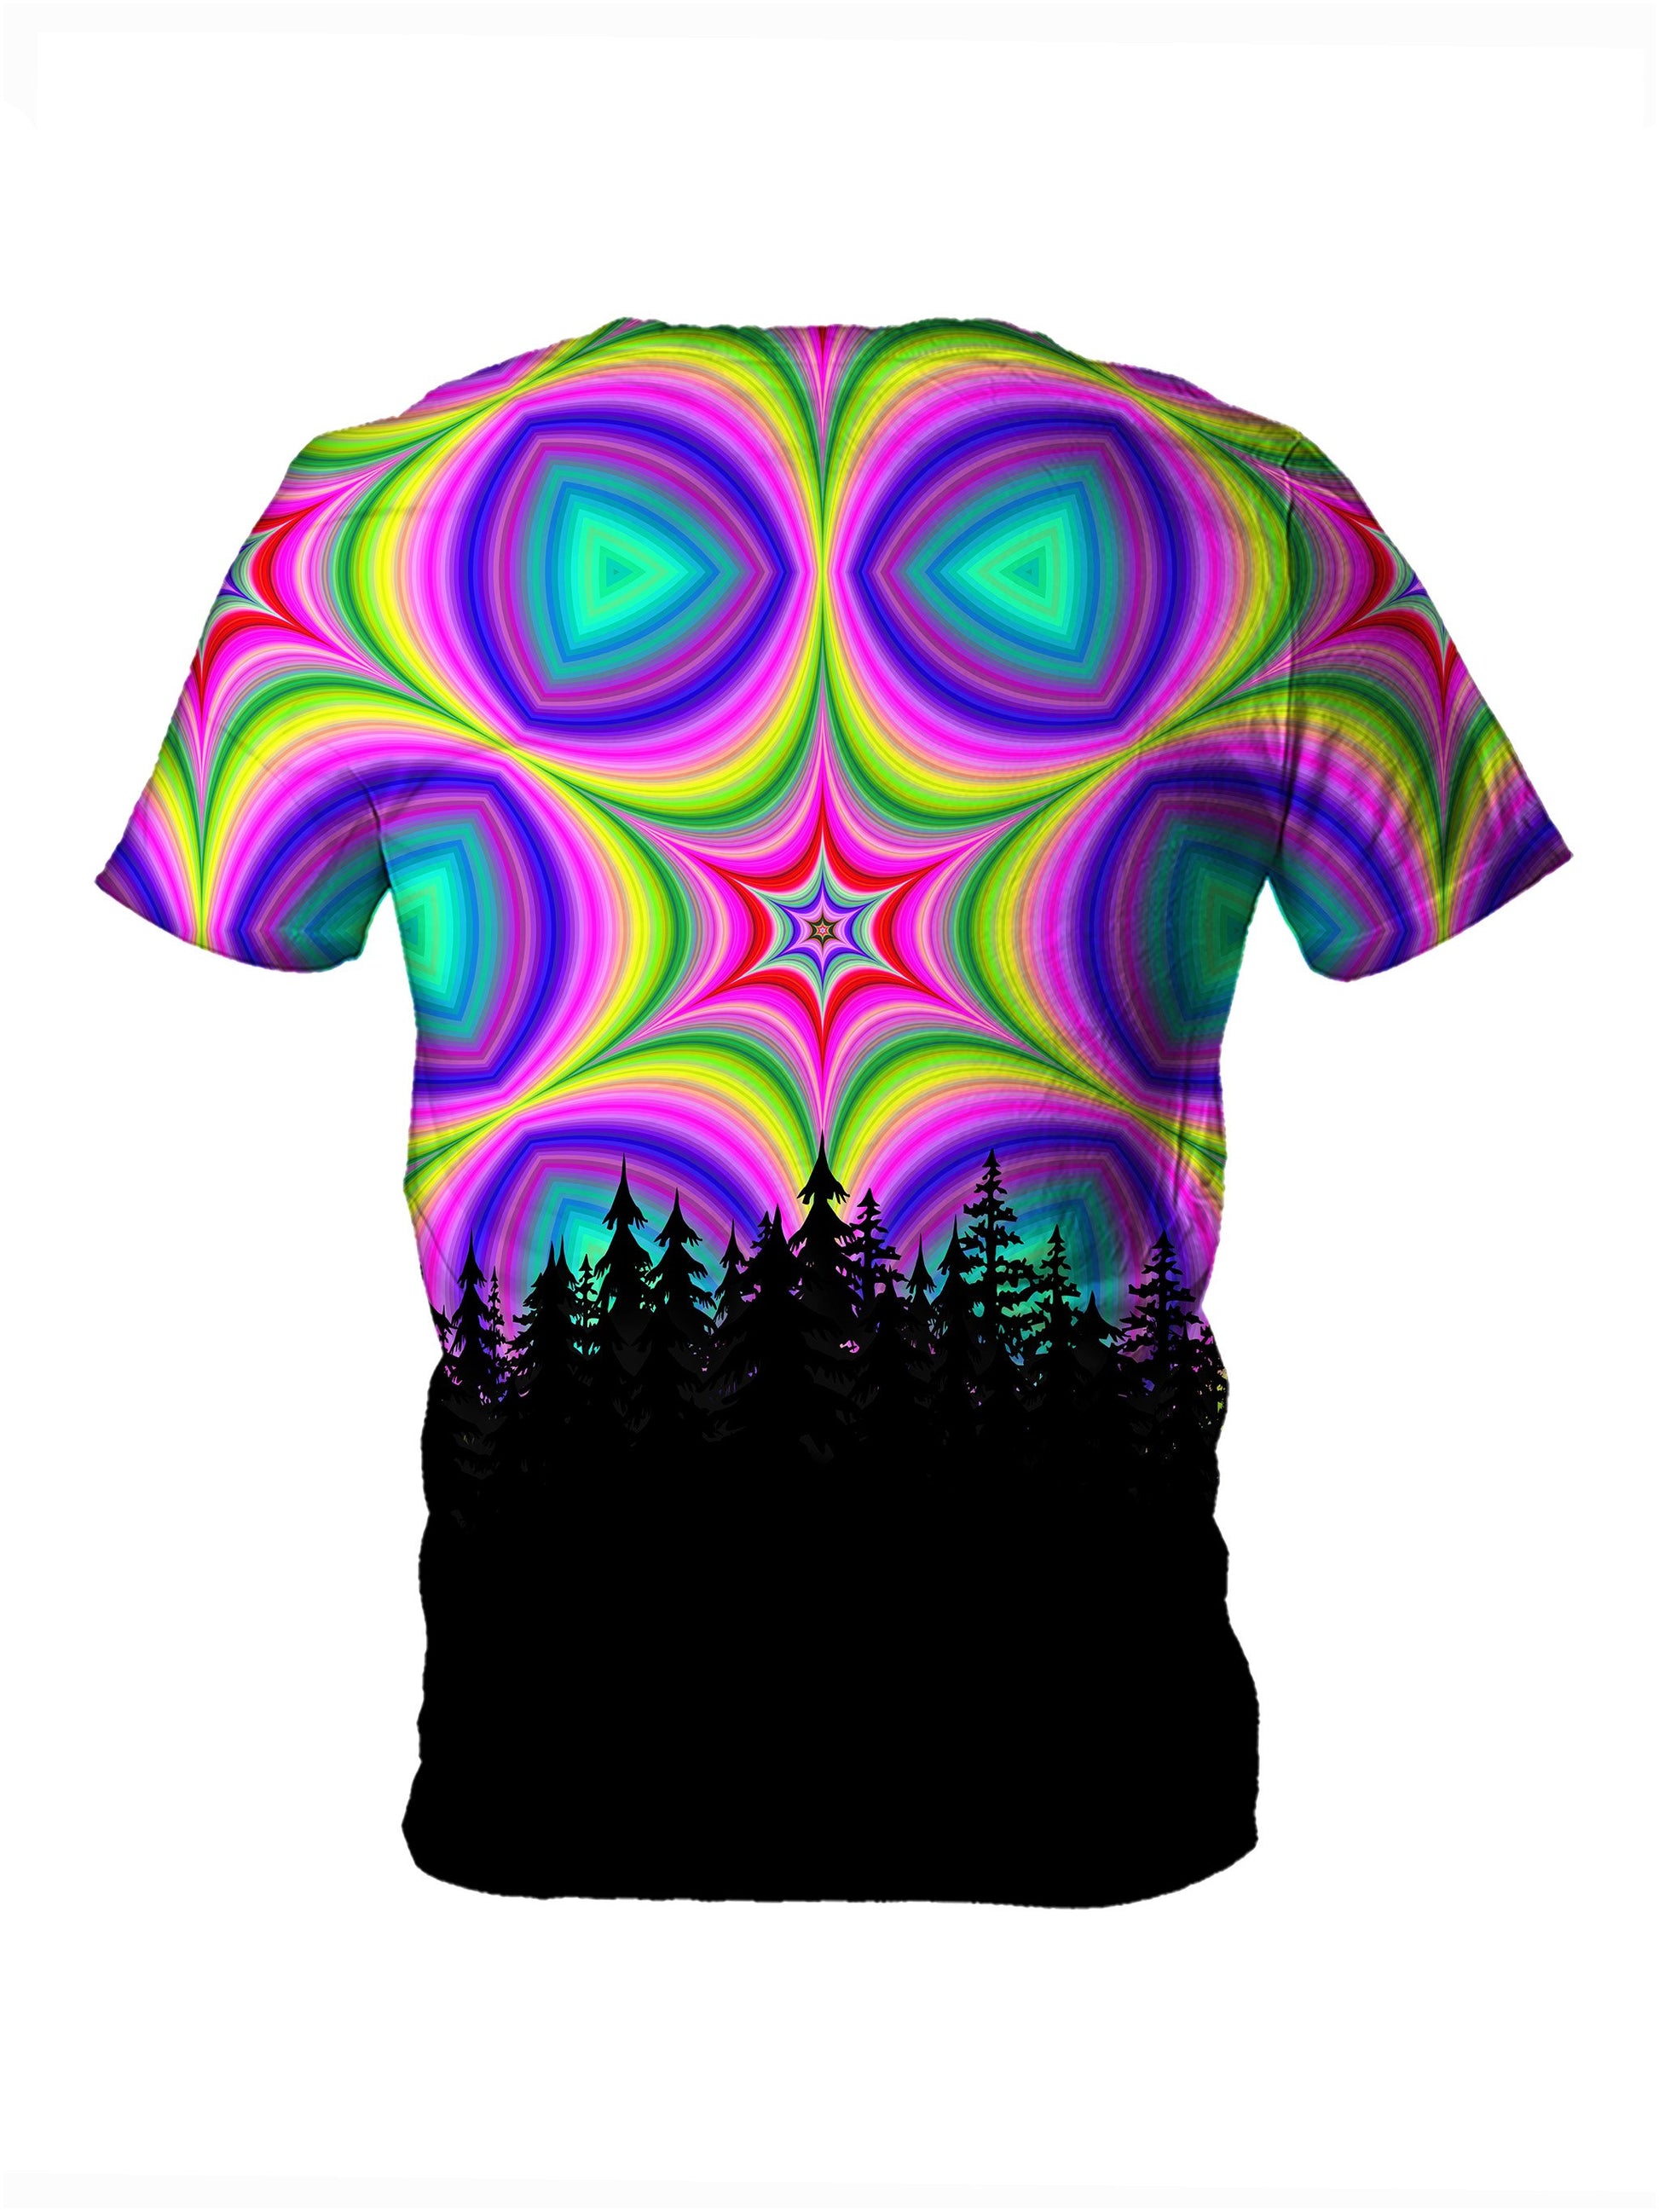 Back view of all over print psychedelic sacred geometry nature t shirt by Gratefully Dyed Apparel. 